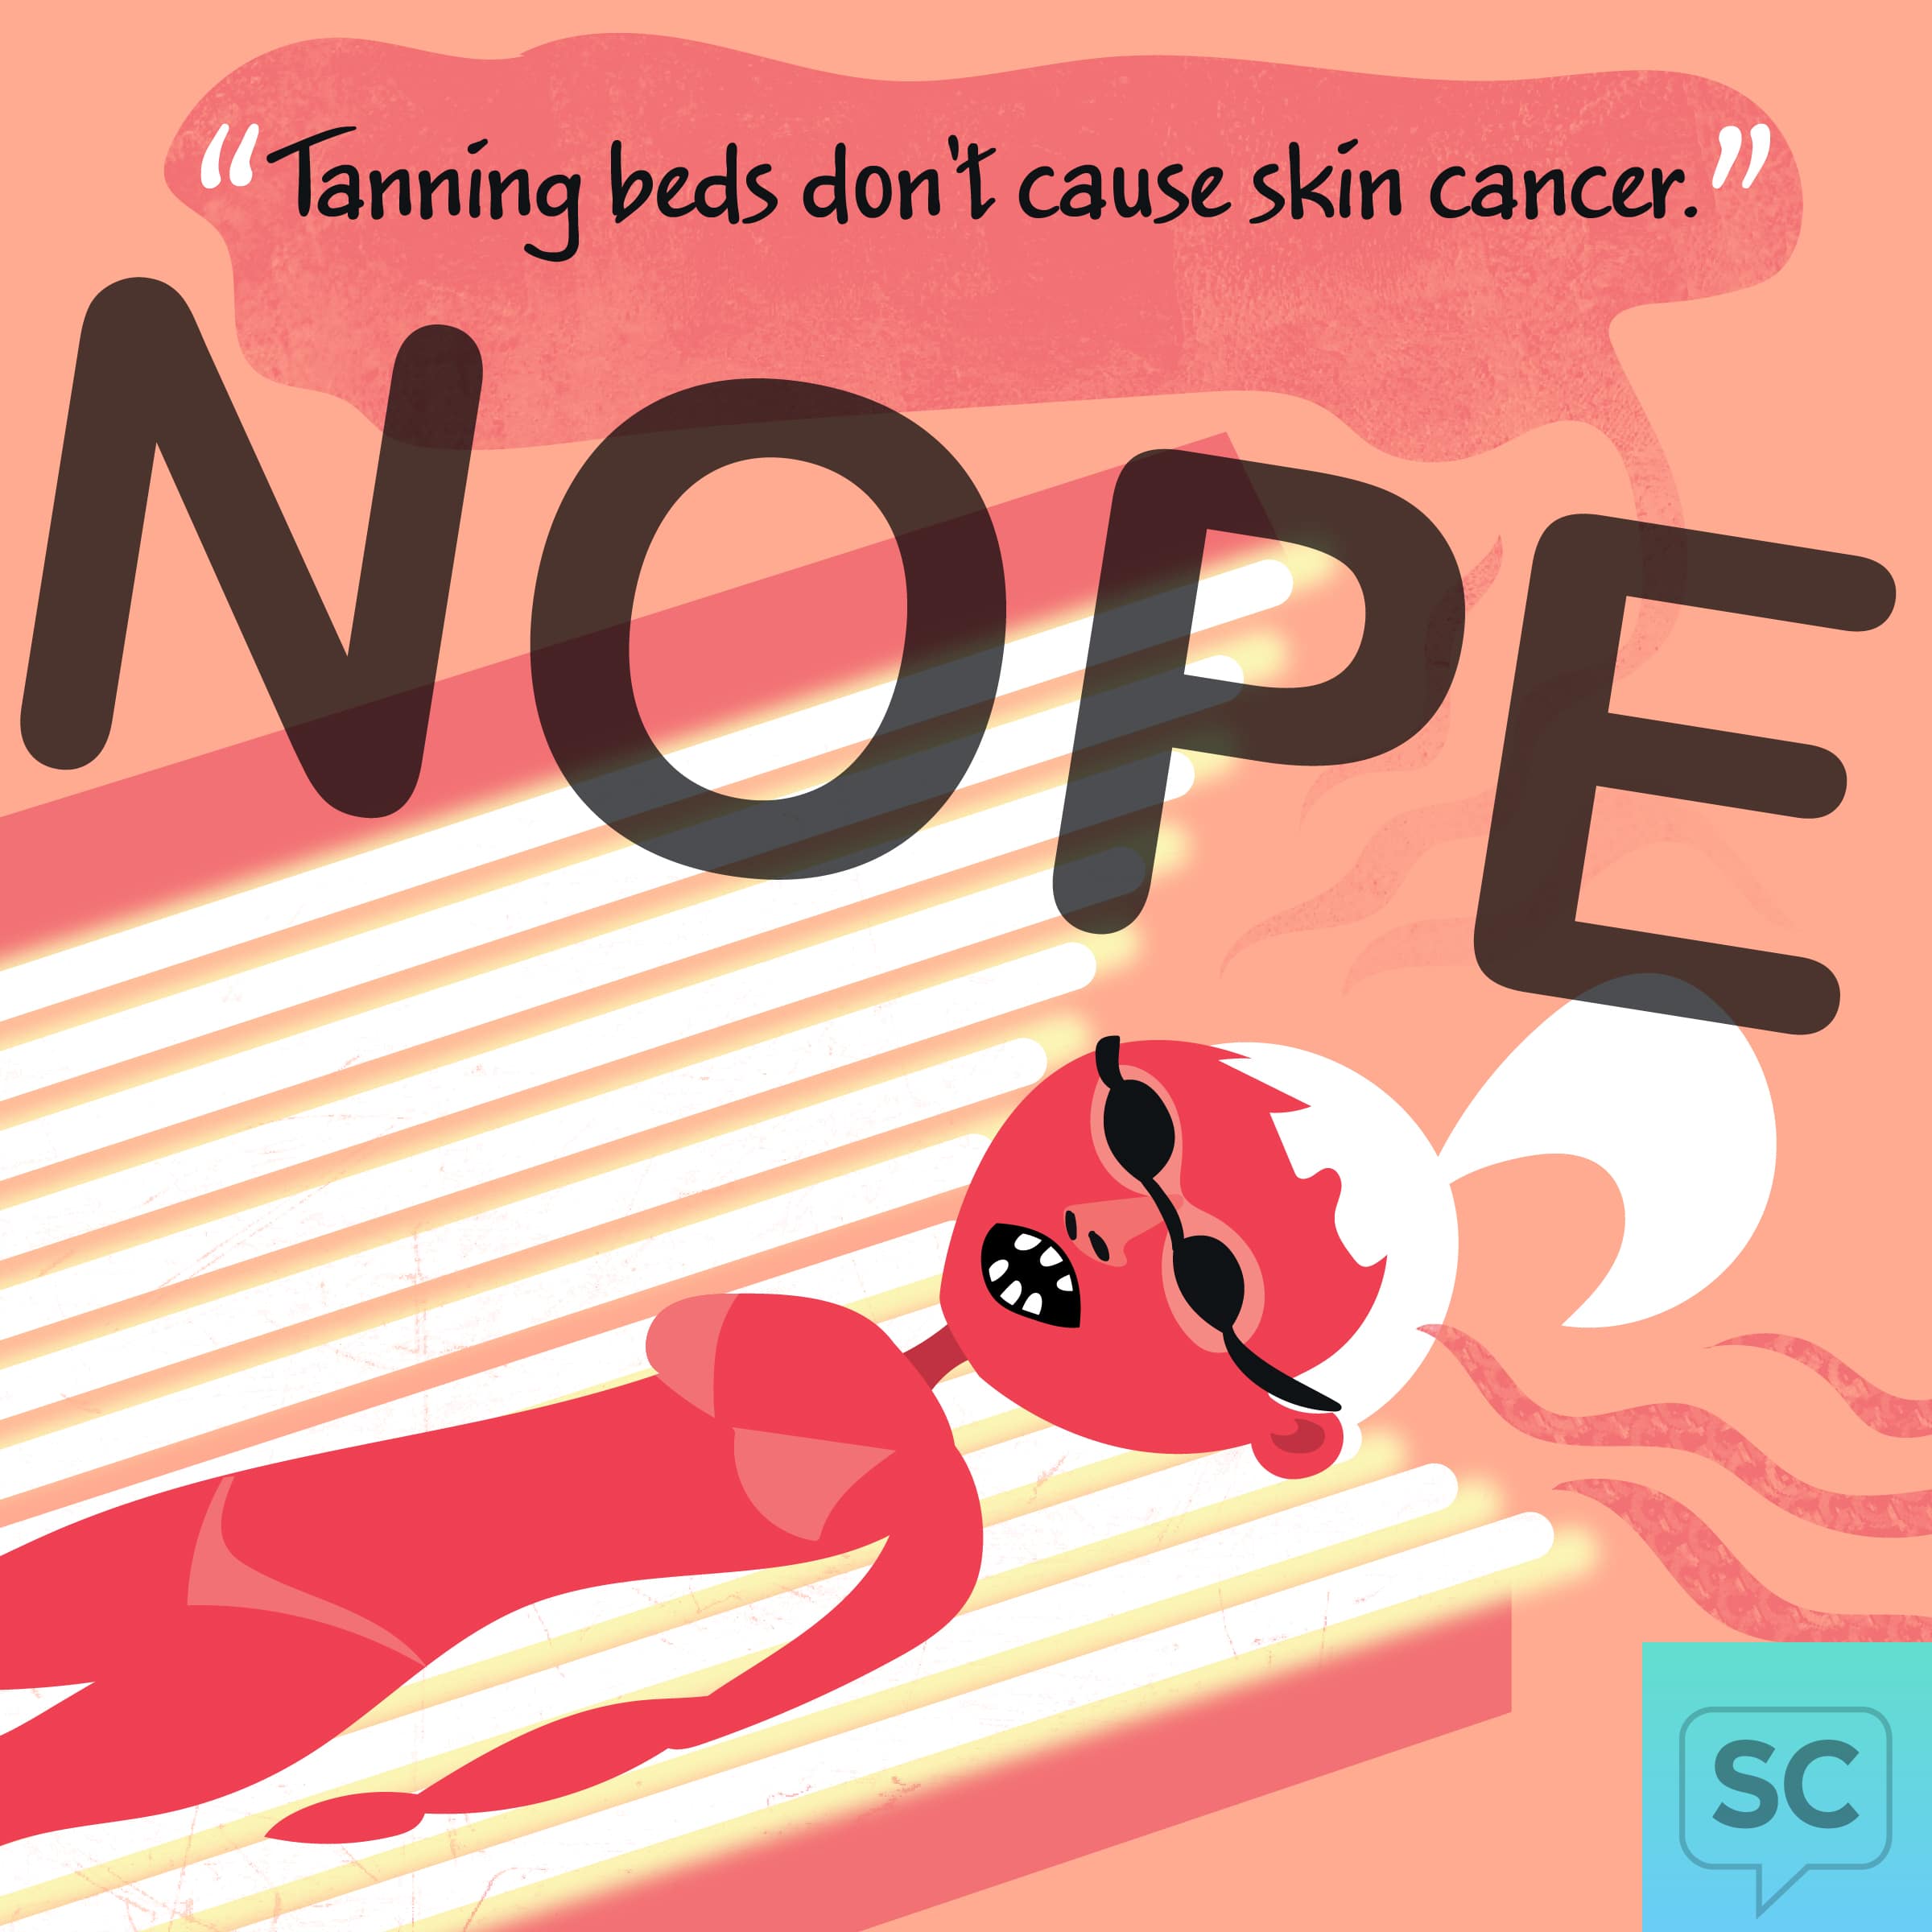 A woman with bright red skin says tanning beds do not cause skin cancer